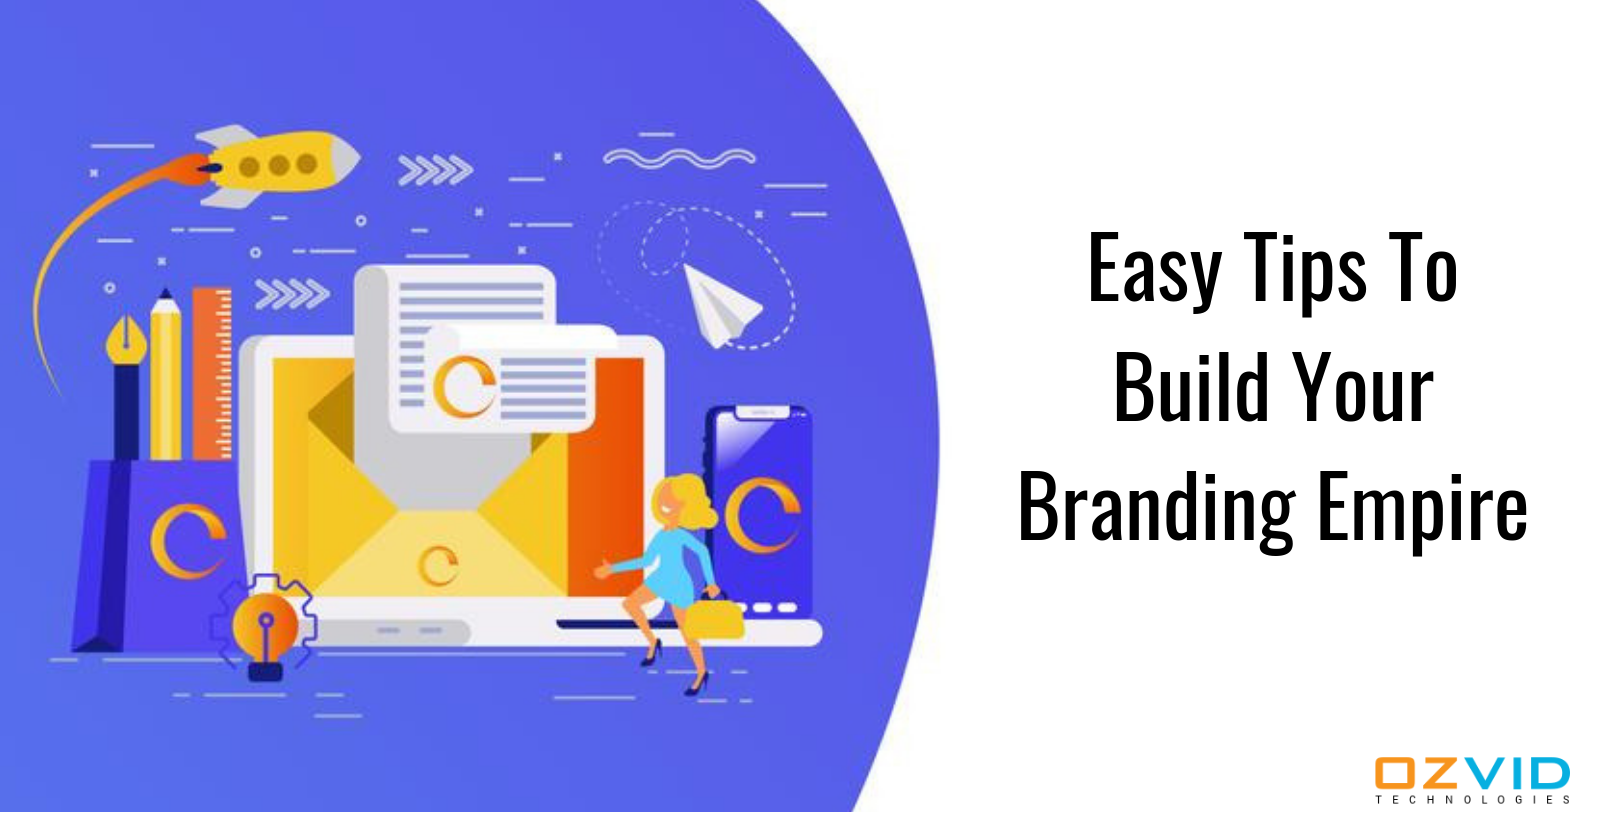 Easy Tips To Build Your Branding Empire